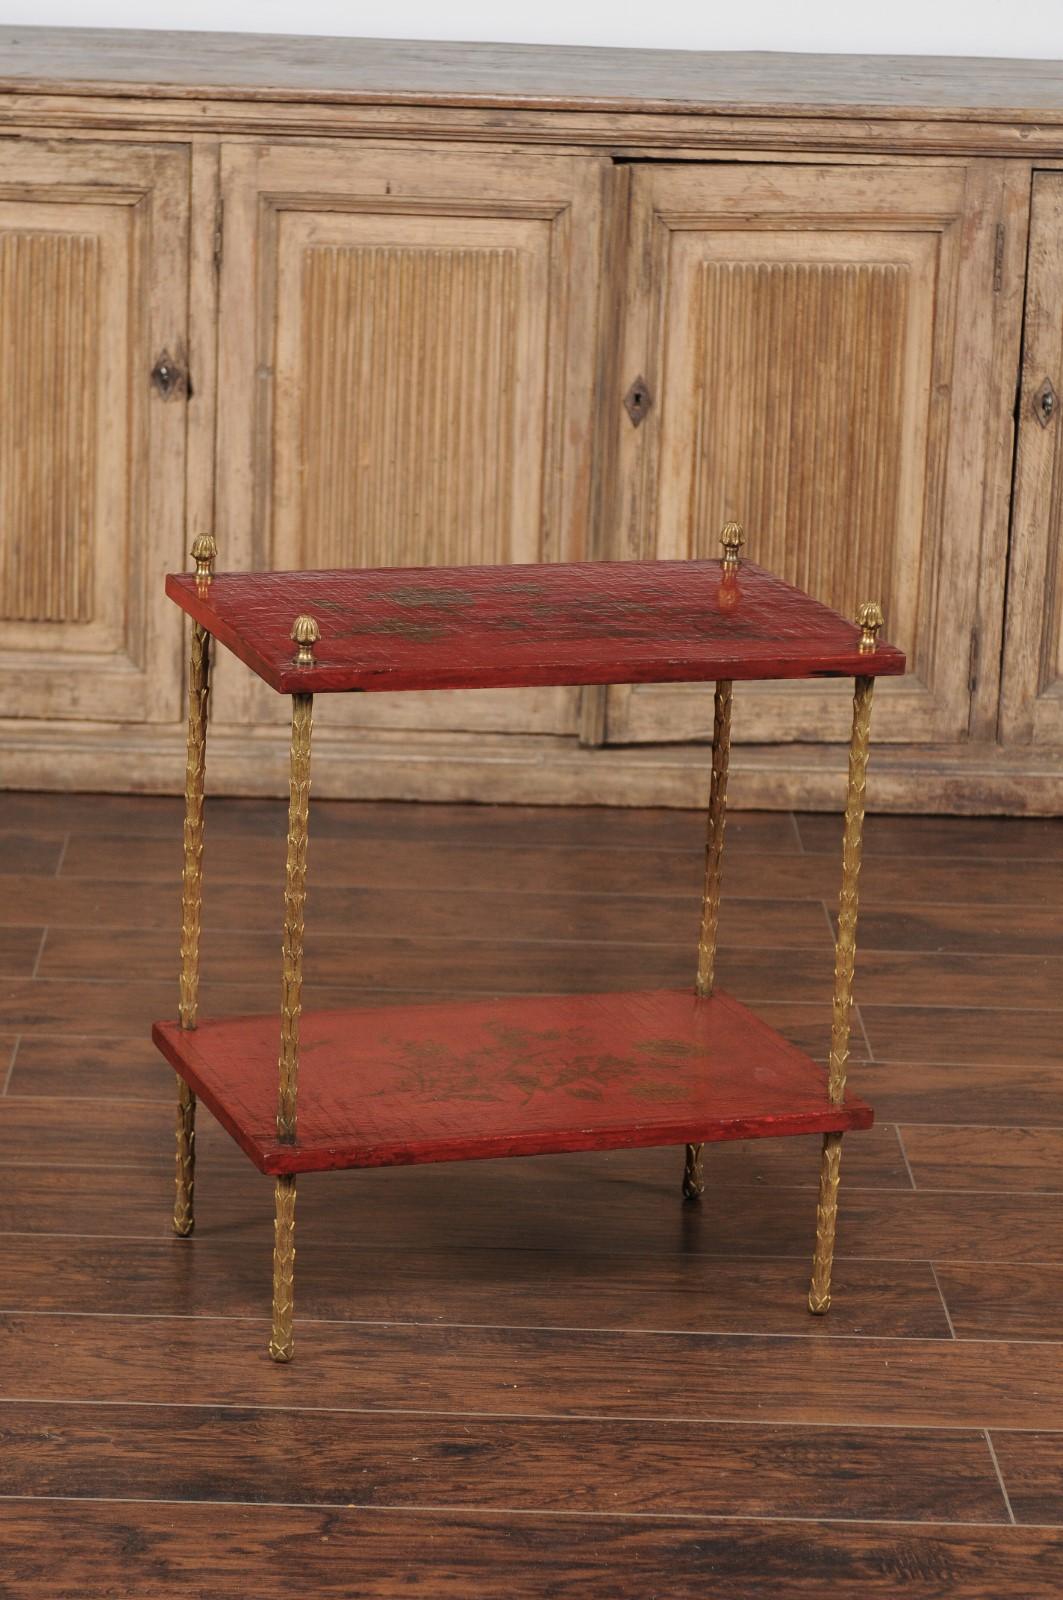 A French vintage Maison Jansen style tiered side table from the mid-20th century, with bronze legs and chinoiserie décor. This French Maison Jansen style table features four slender bronze legs with foliage style texture, supporting and securing two